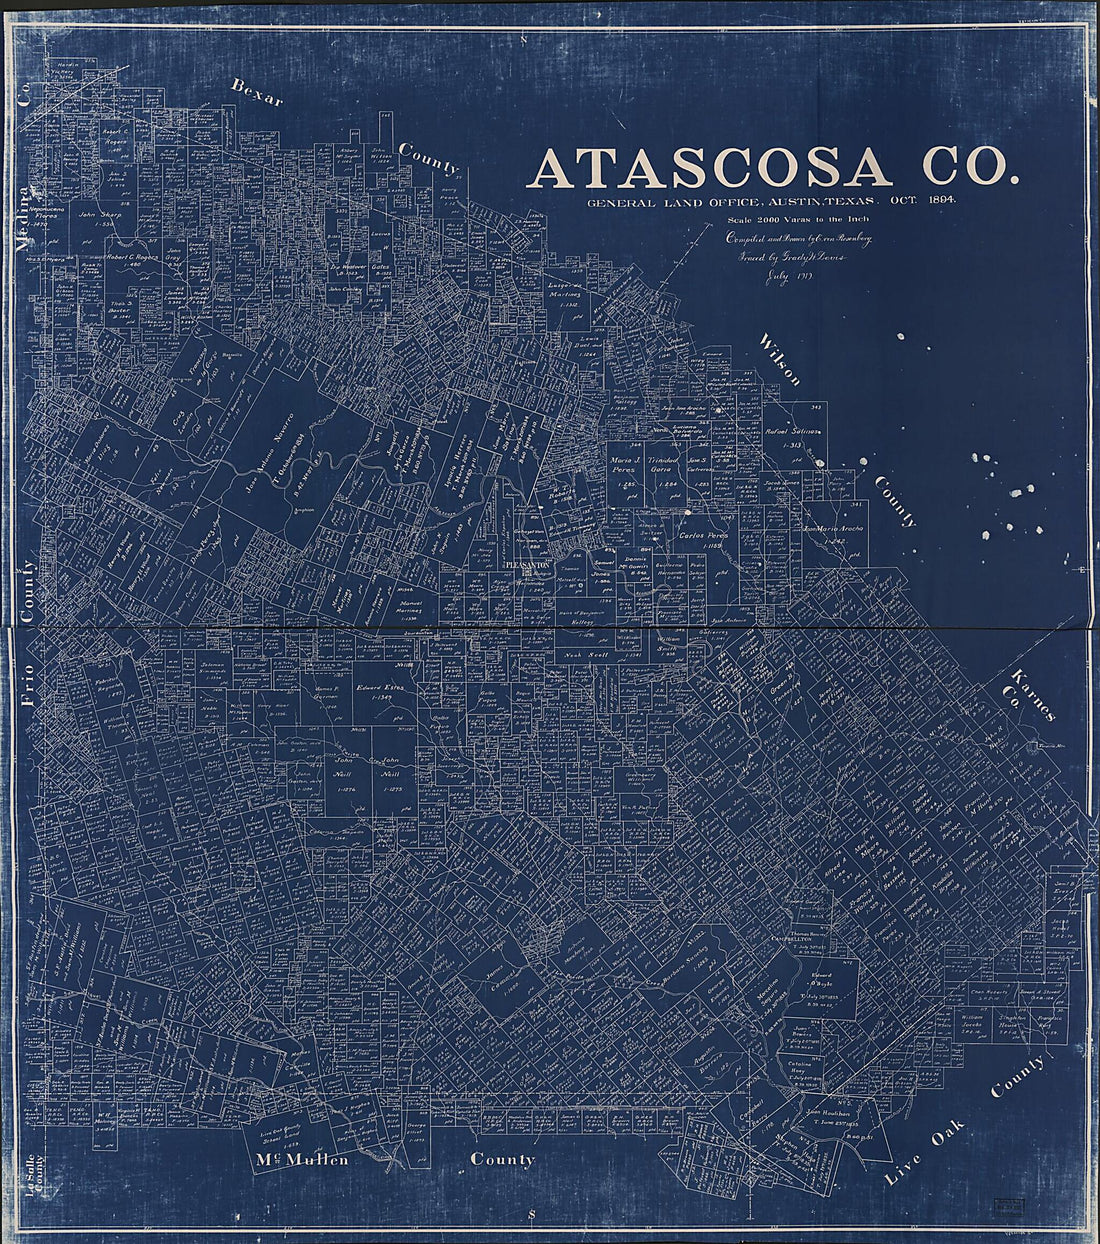 This old map of Atascosa County (Atascosa County) from 1894 was created by E. Von Rosenberg in 1894